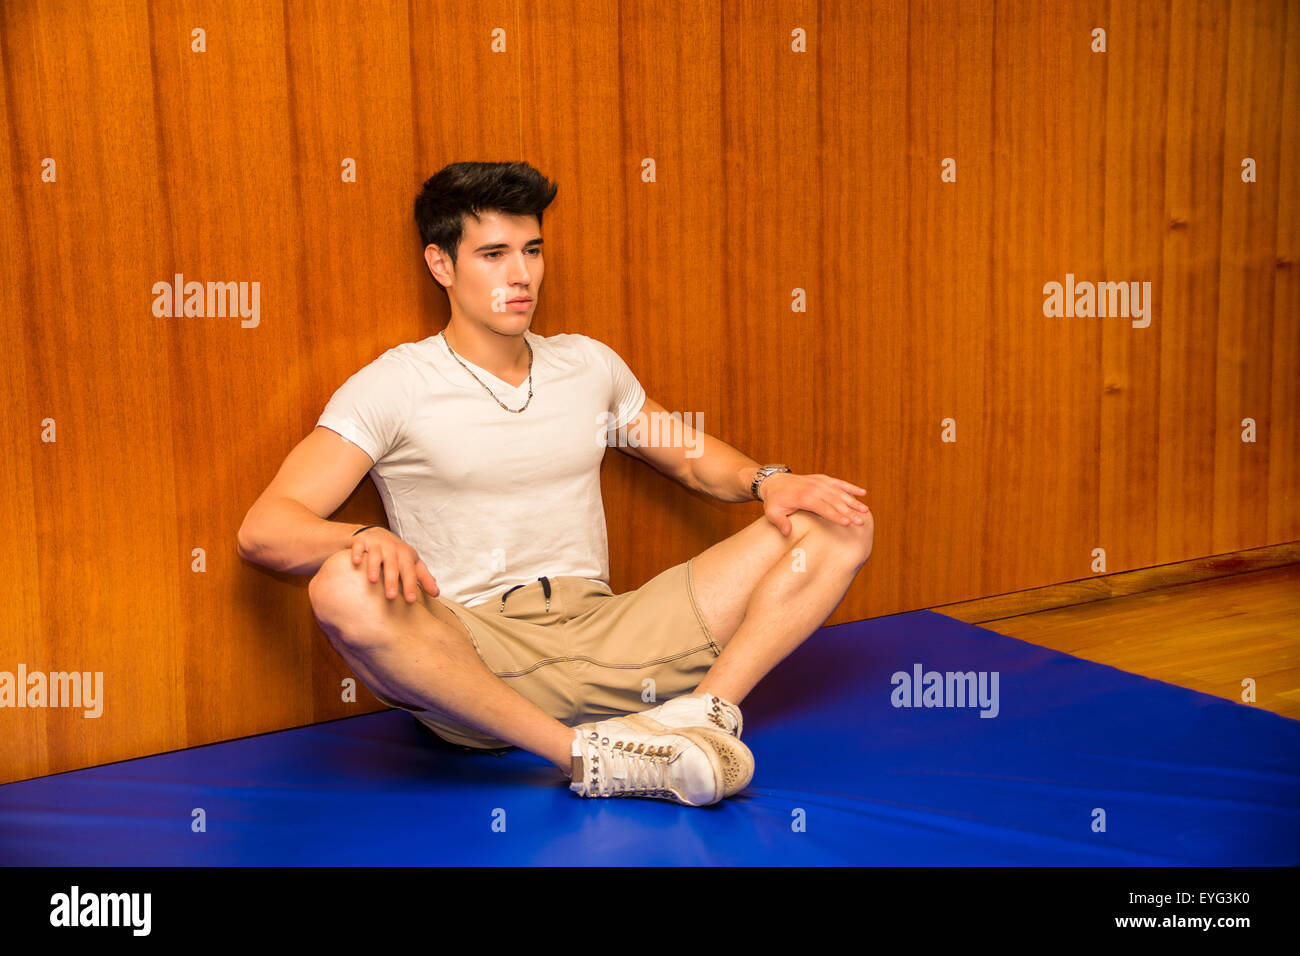 Attractive young man stretching on gym mat, pressing on knees to open legs Stock Photo